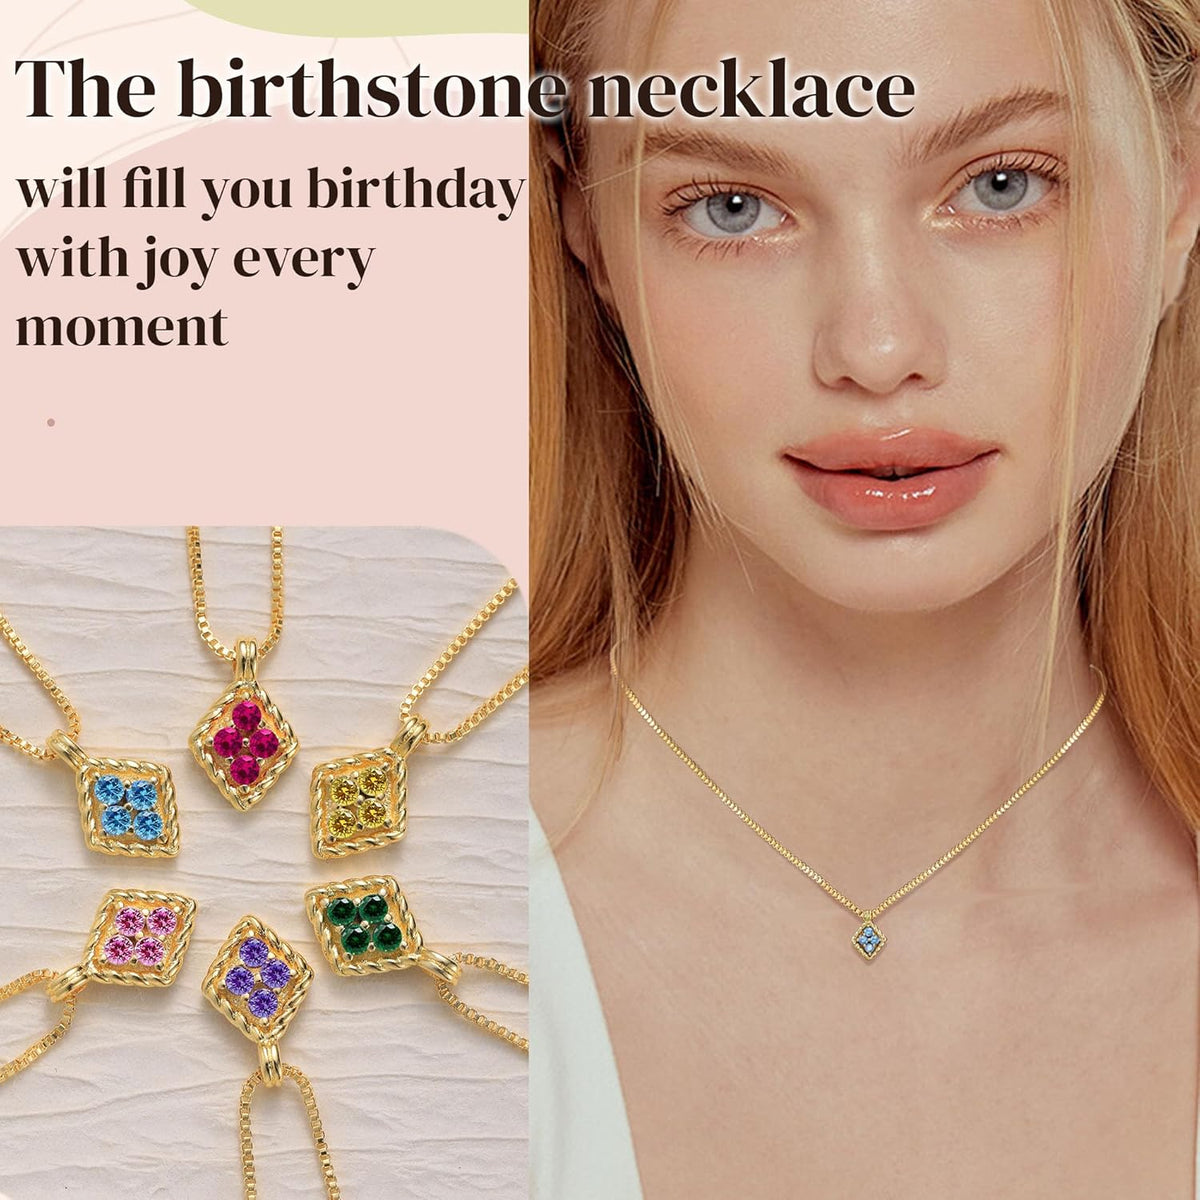 Birthstone Necklace for Women, Birthday Gifts for Her Gold Birthstone Necklaces for Women Teen Girl Gifts Trendy Rhomboid Pendant Necklace 21st 30th Mom Birthday Gift Christmas Jewelry